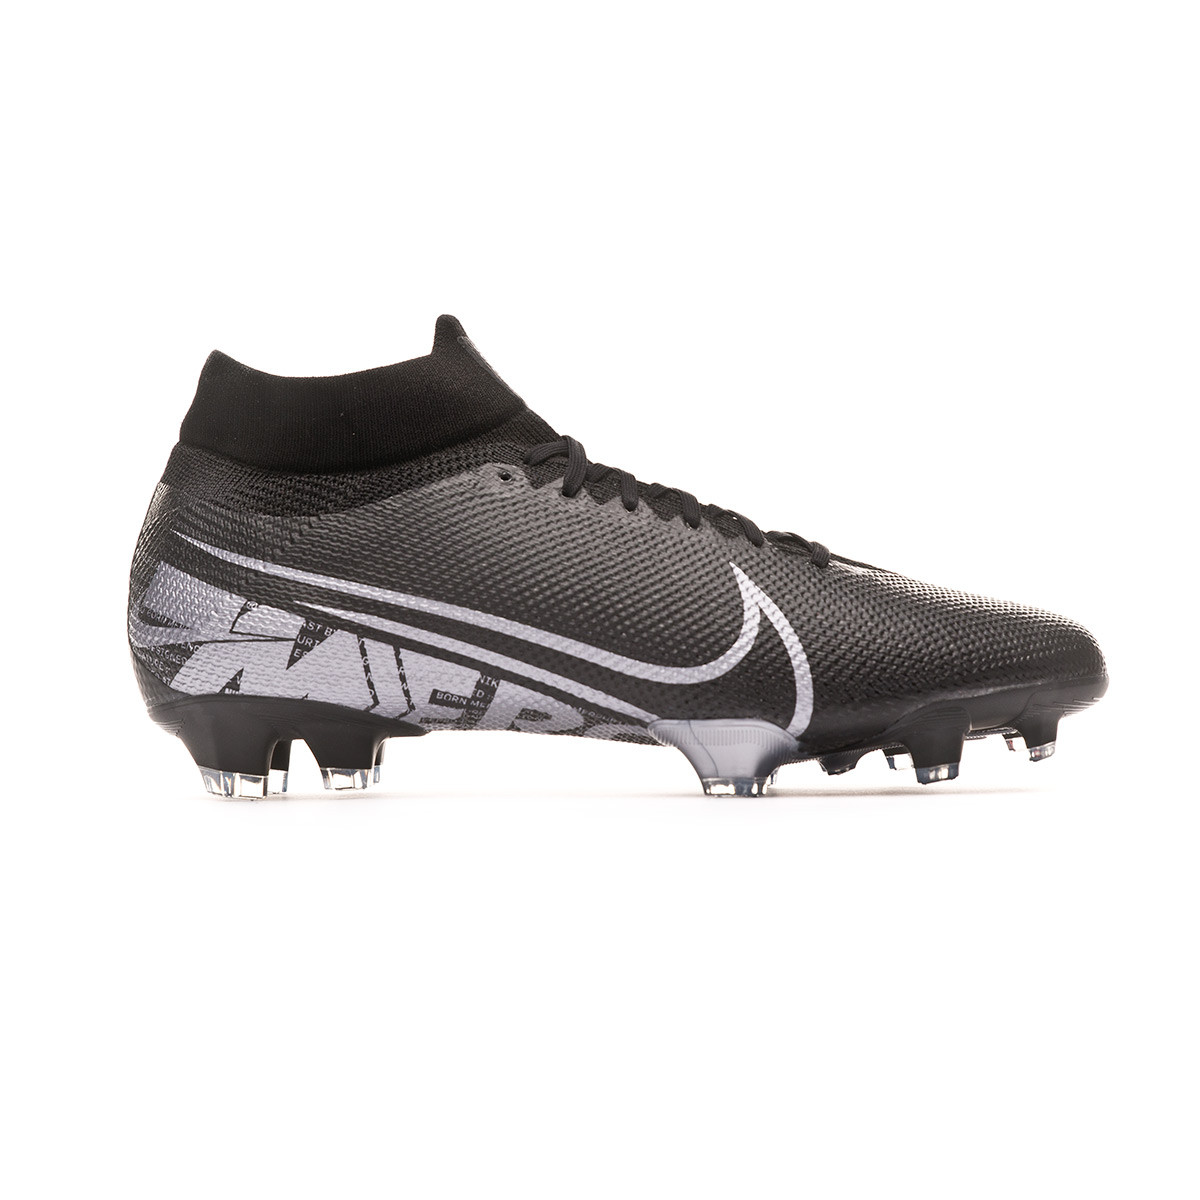 Buy Nike Mercurial Superfly 6 Pro FG Gray Yellow for only 60